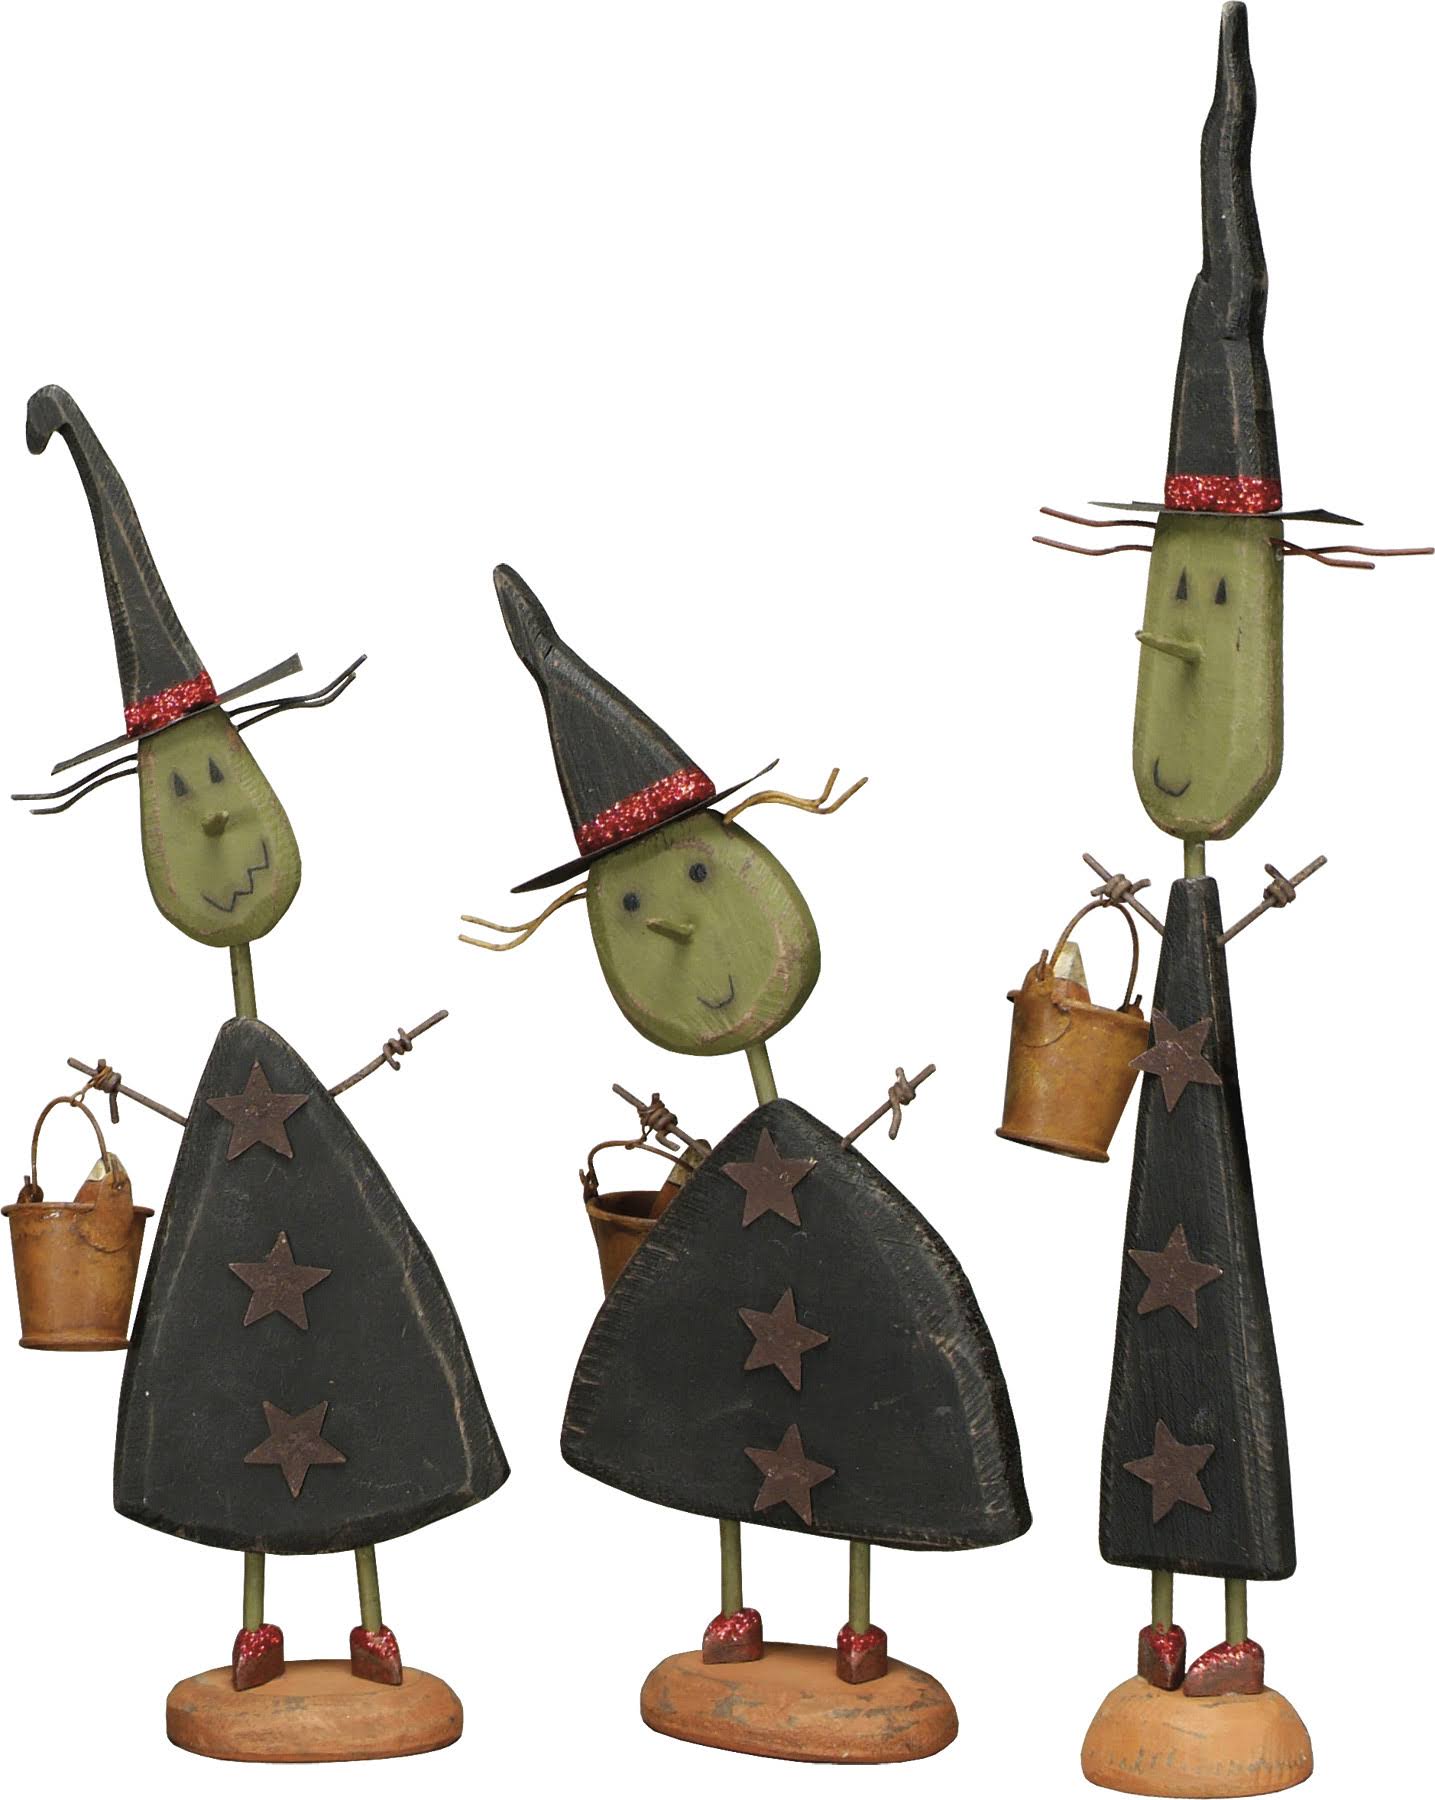 Primitives by Kathy Small Standing Witches - Set of 3 at Hautelook